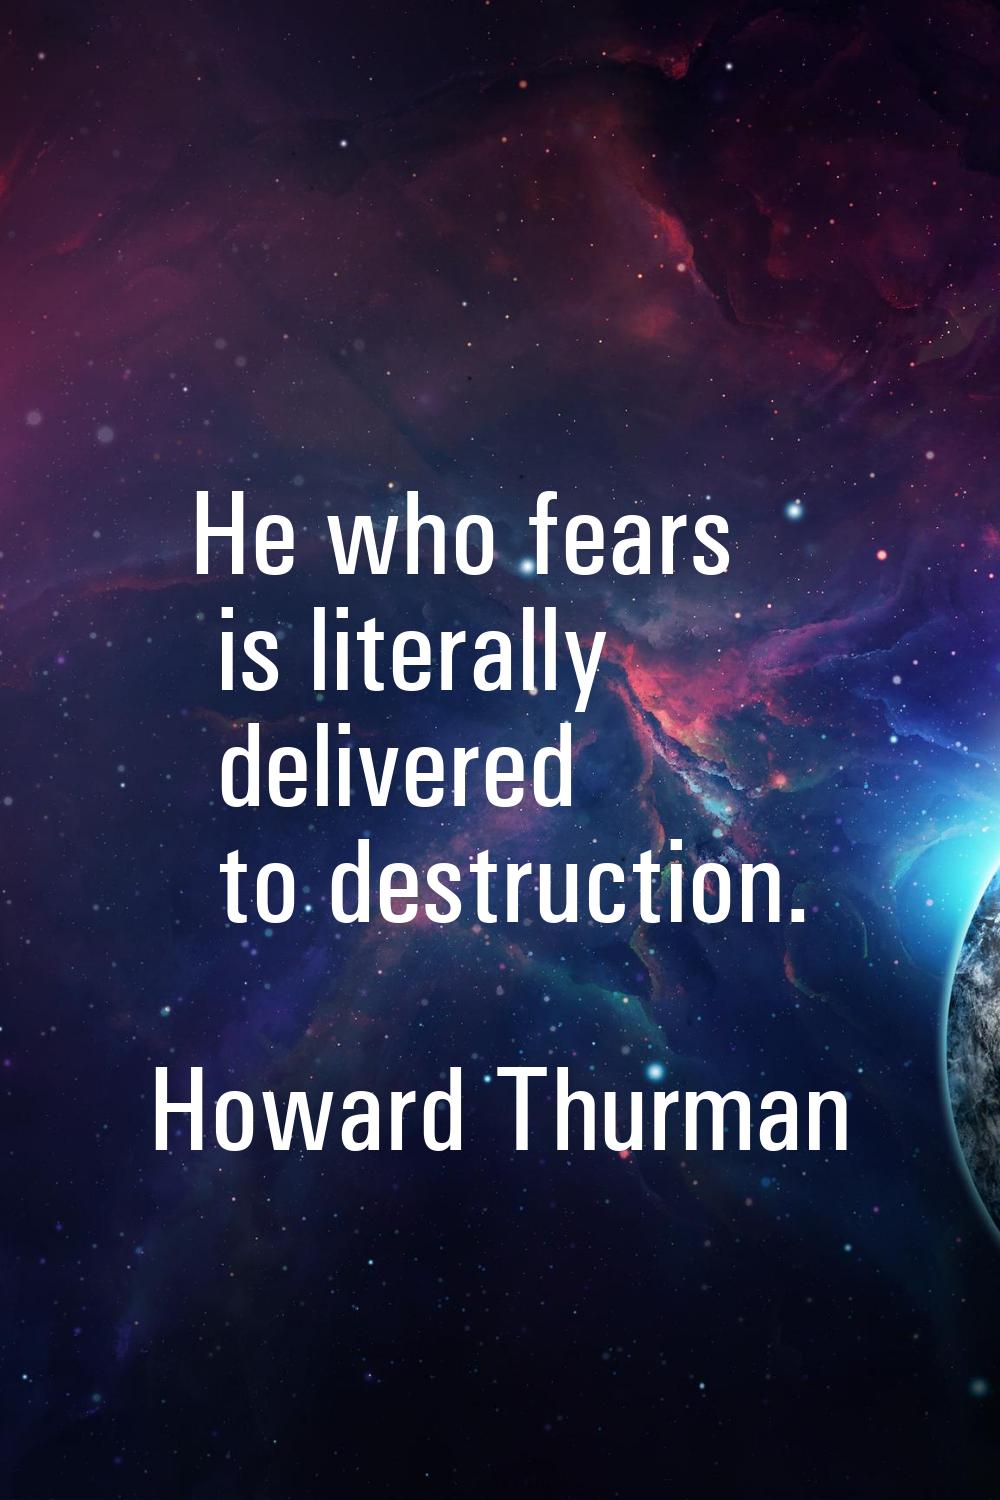 He who fears is literally delivered to destruction.